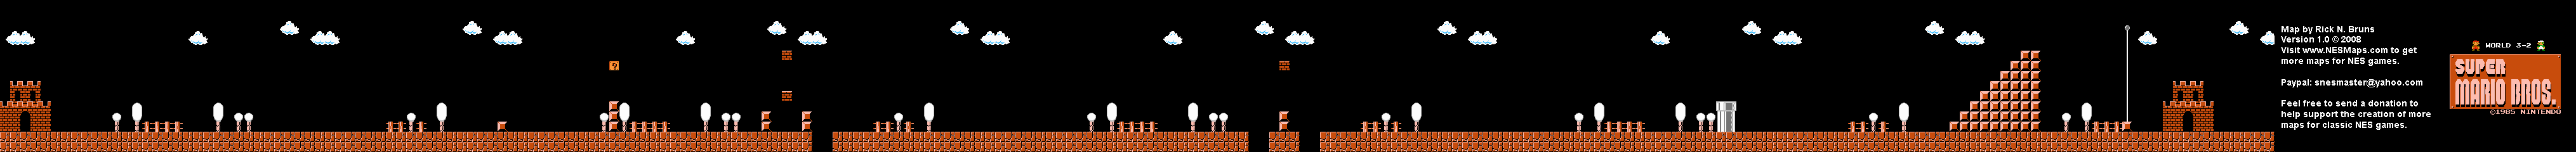 Super Mario Brothers - World 3-2 Nintendo NES Background Only Map